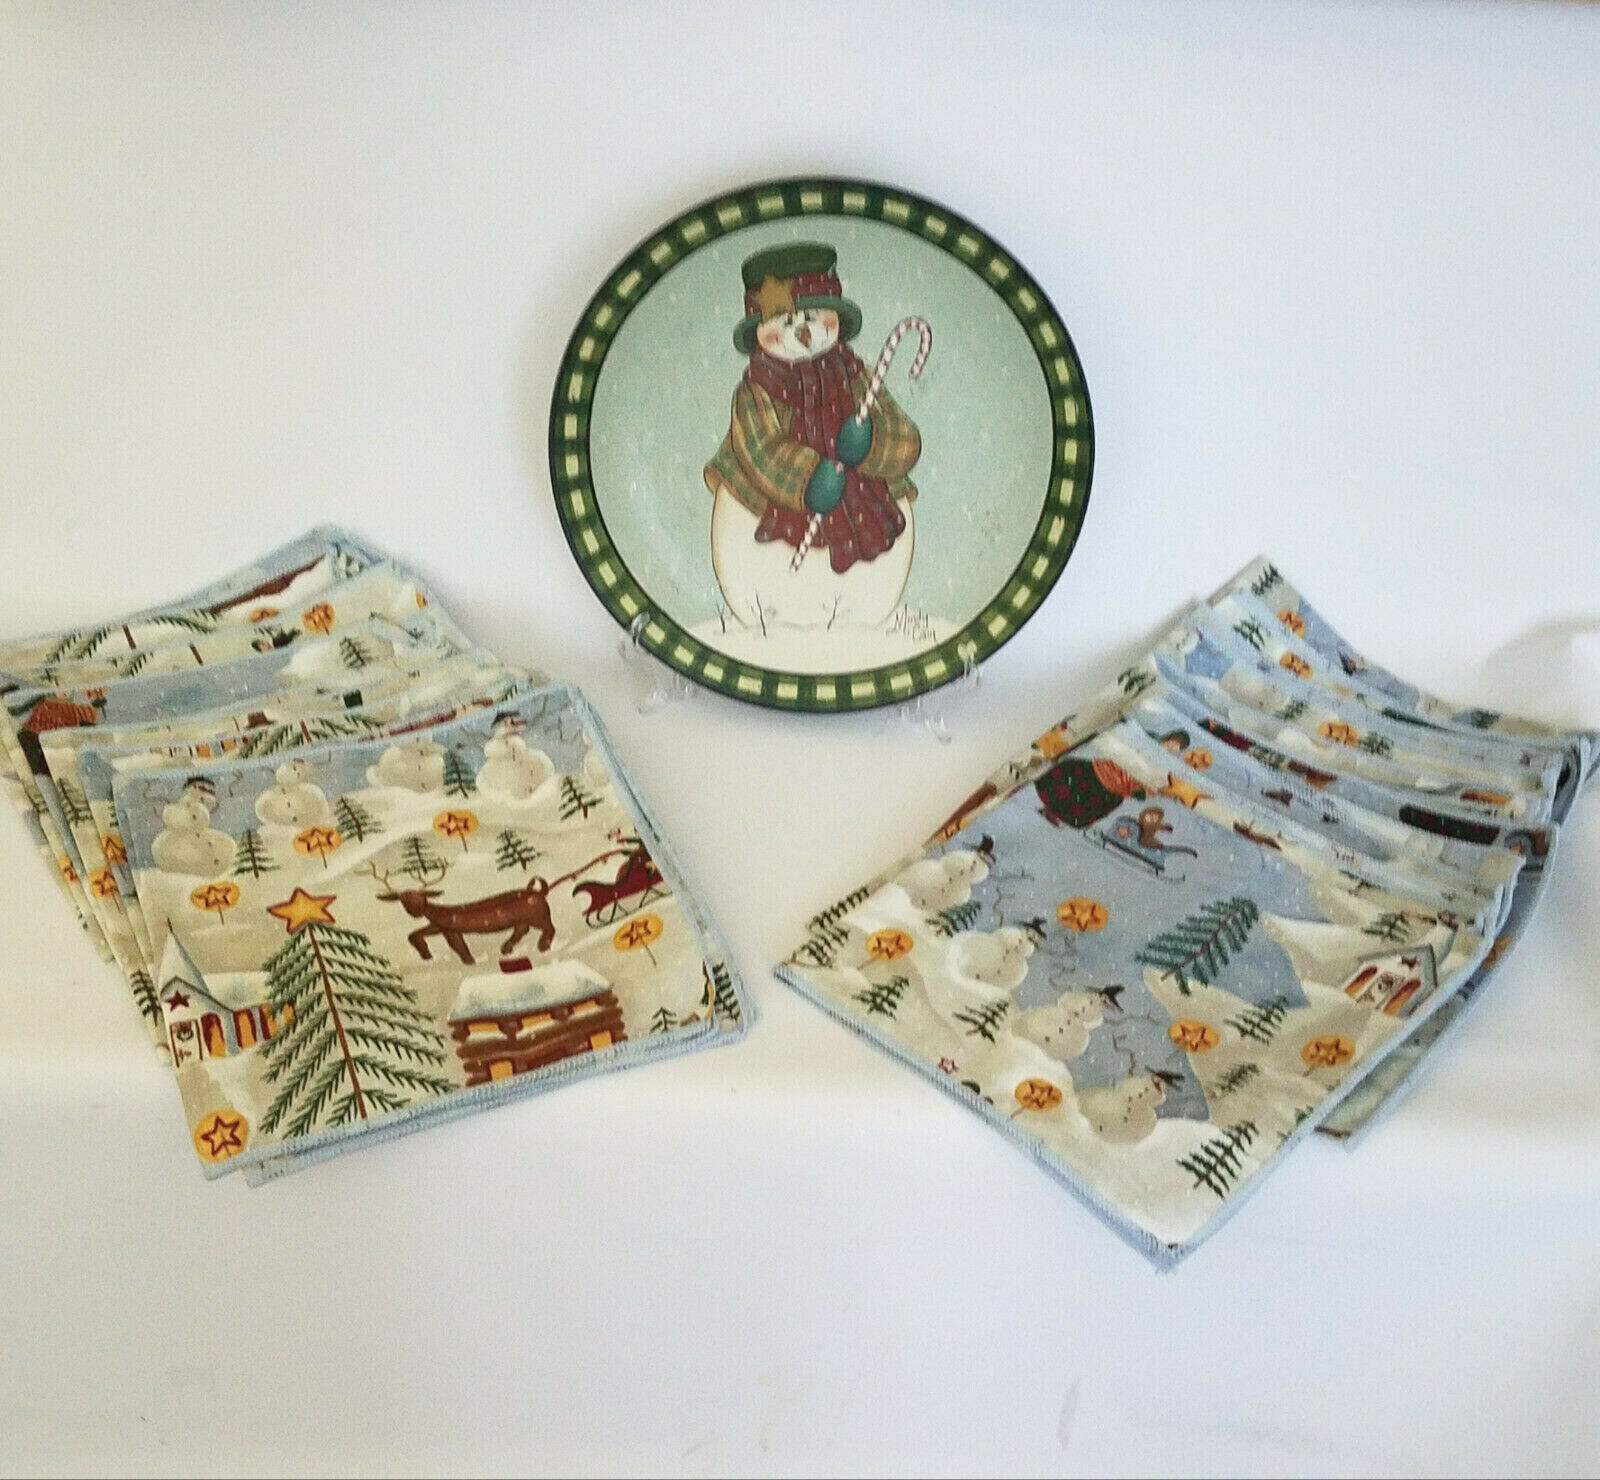 Crazy Mountain Snowman Decorative Plate 10 Inch With 15 Cloth Dinner Napkins - $26.00